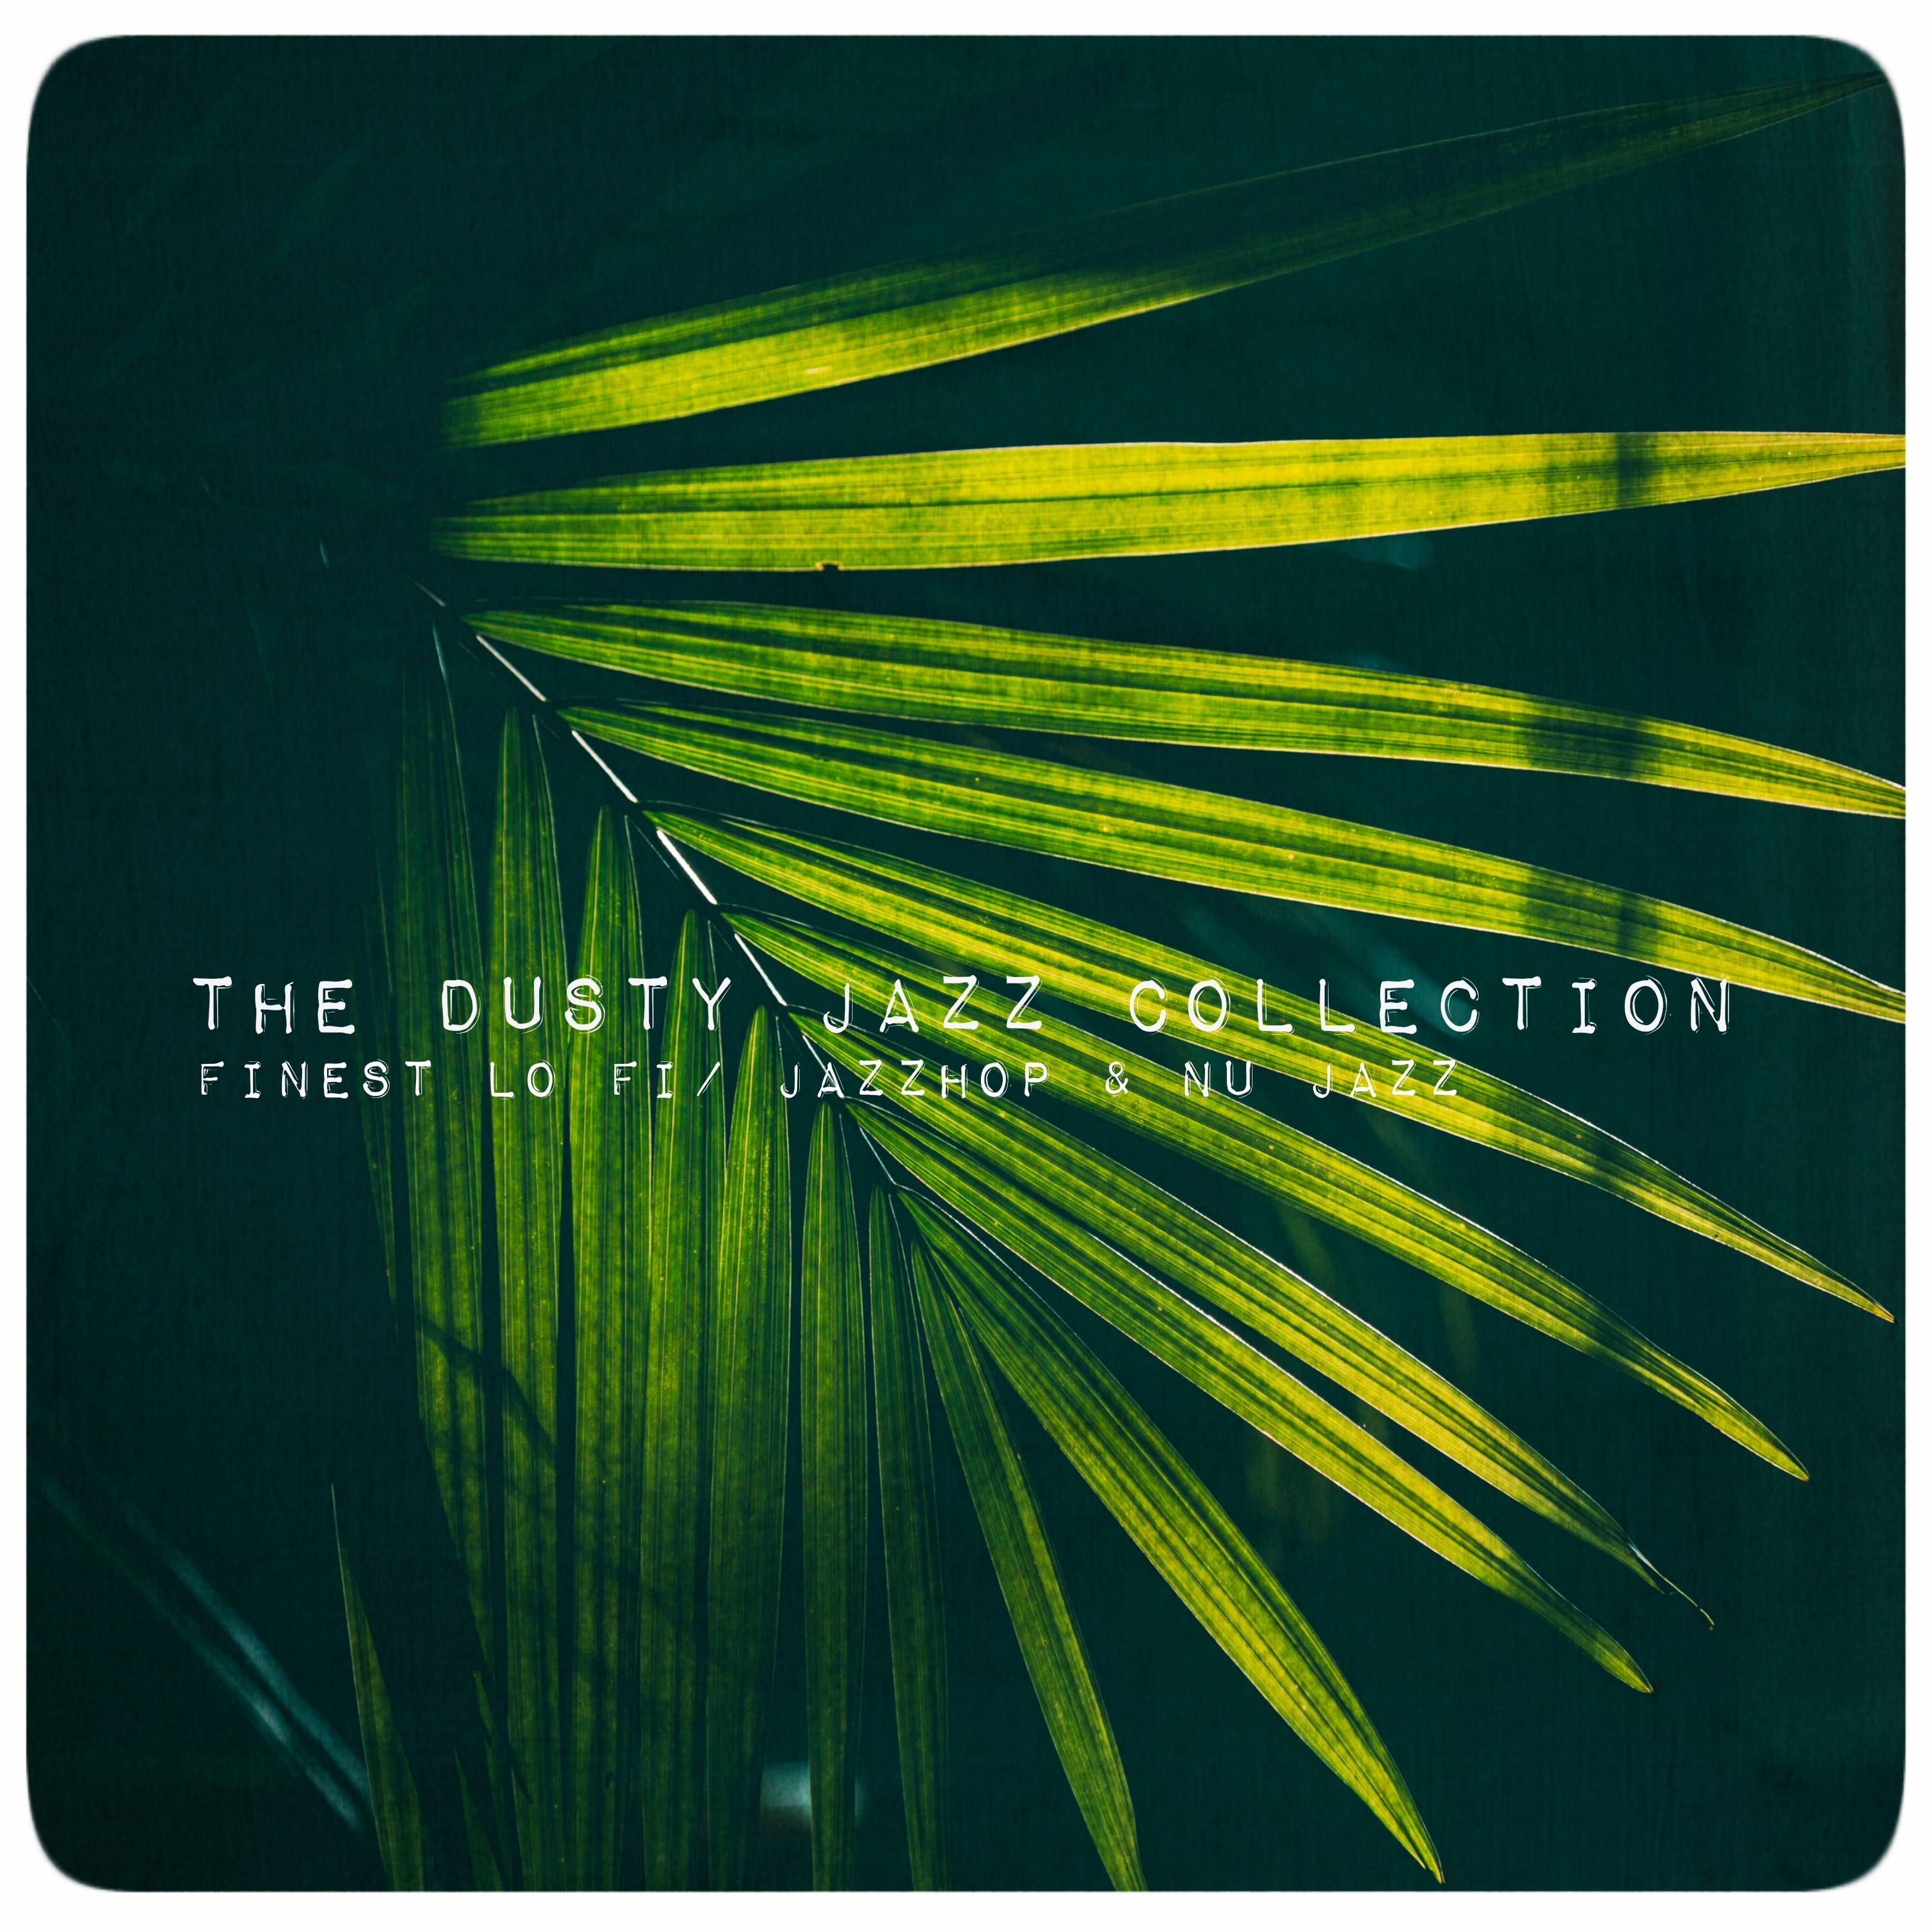 The Dusty Jazz Collection